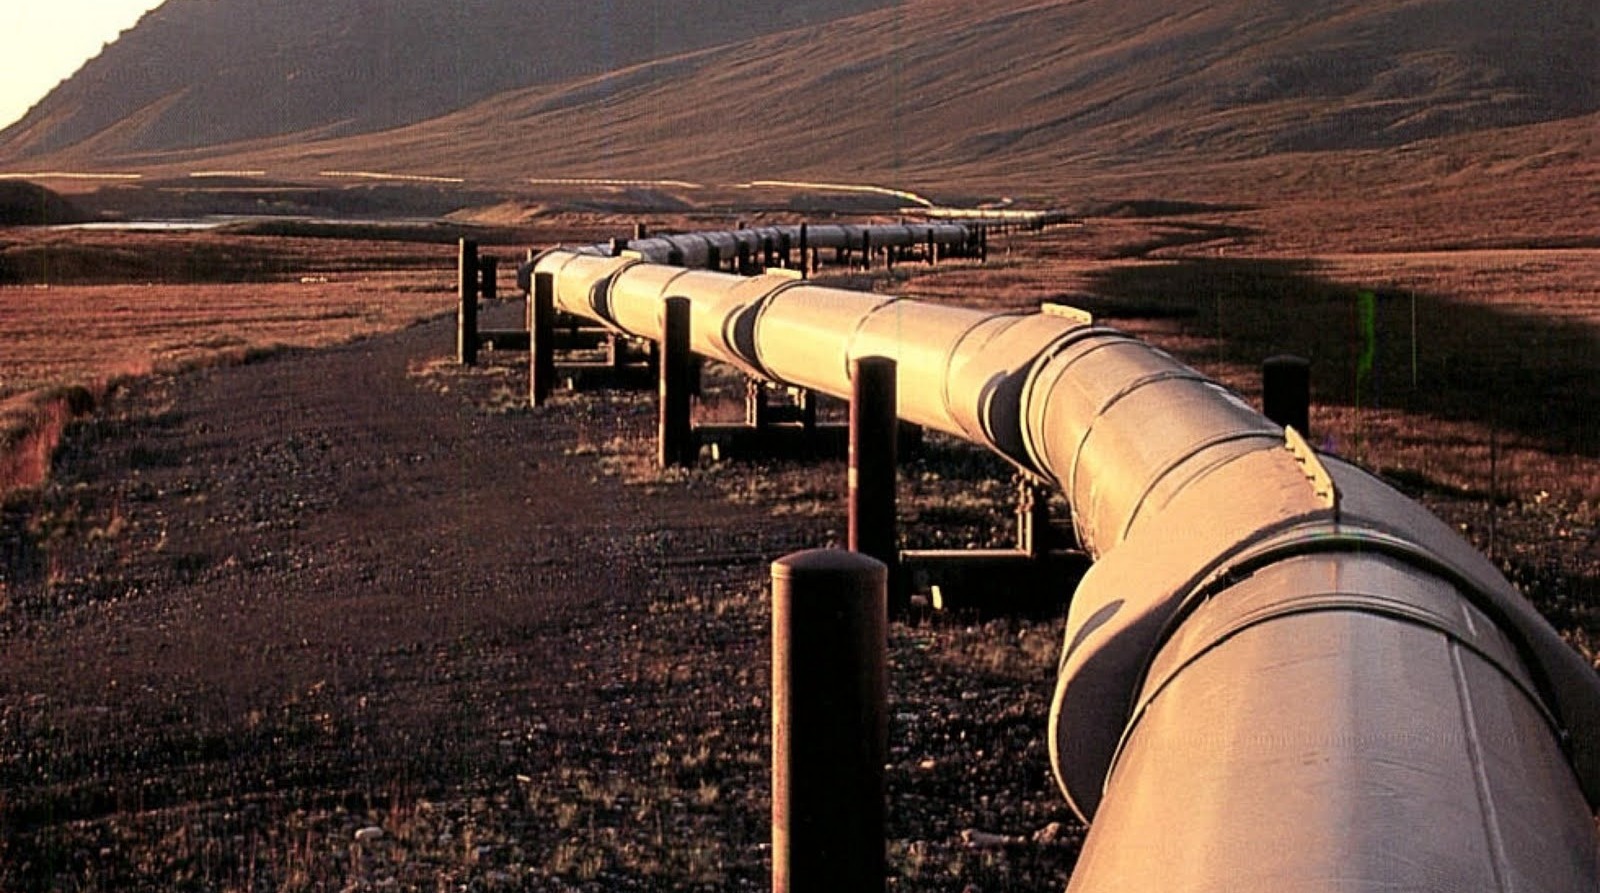 East African Crude Oil Pipeline Projecthas rallied the real estate industry's spirits; The number of local housing units occupied by oil and gas industry players increased from 40 last year to 200 by the end of March 2021.